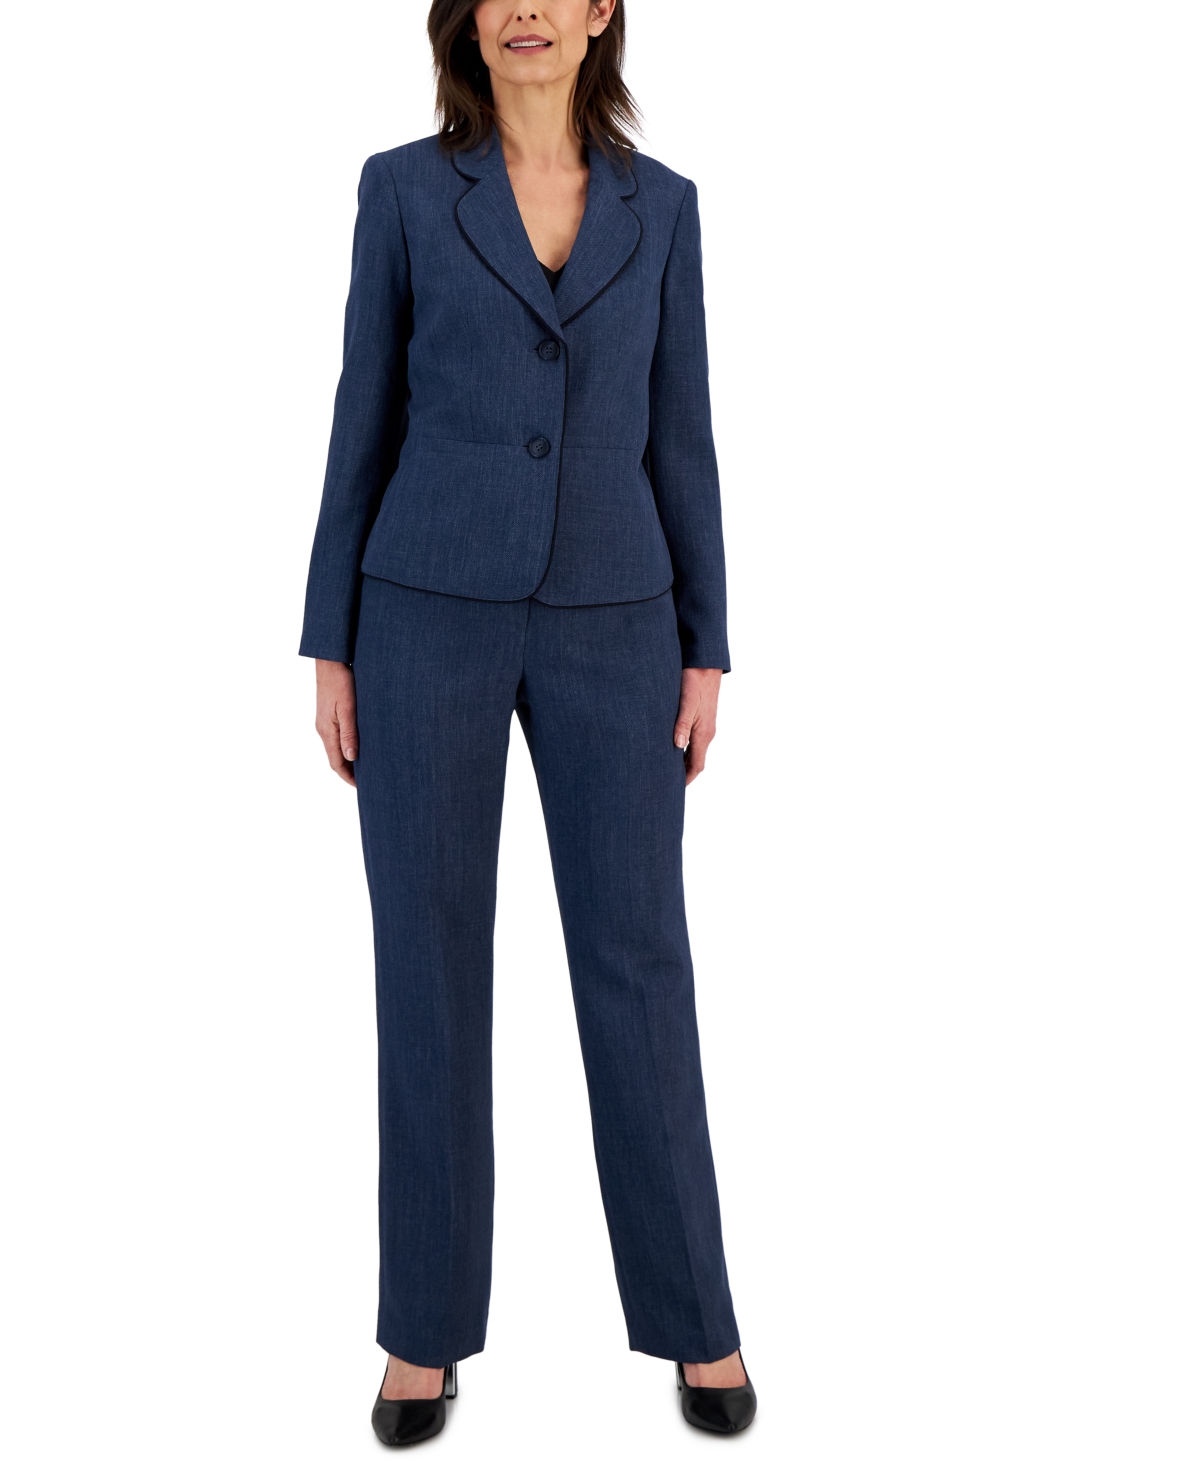 Women's Framed Twill Two-Button Pantsuit, Regular and Petite Sizes - Denim/Black